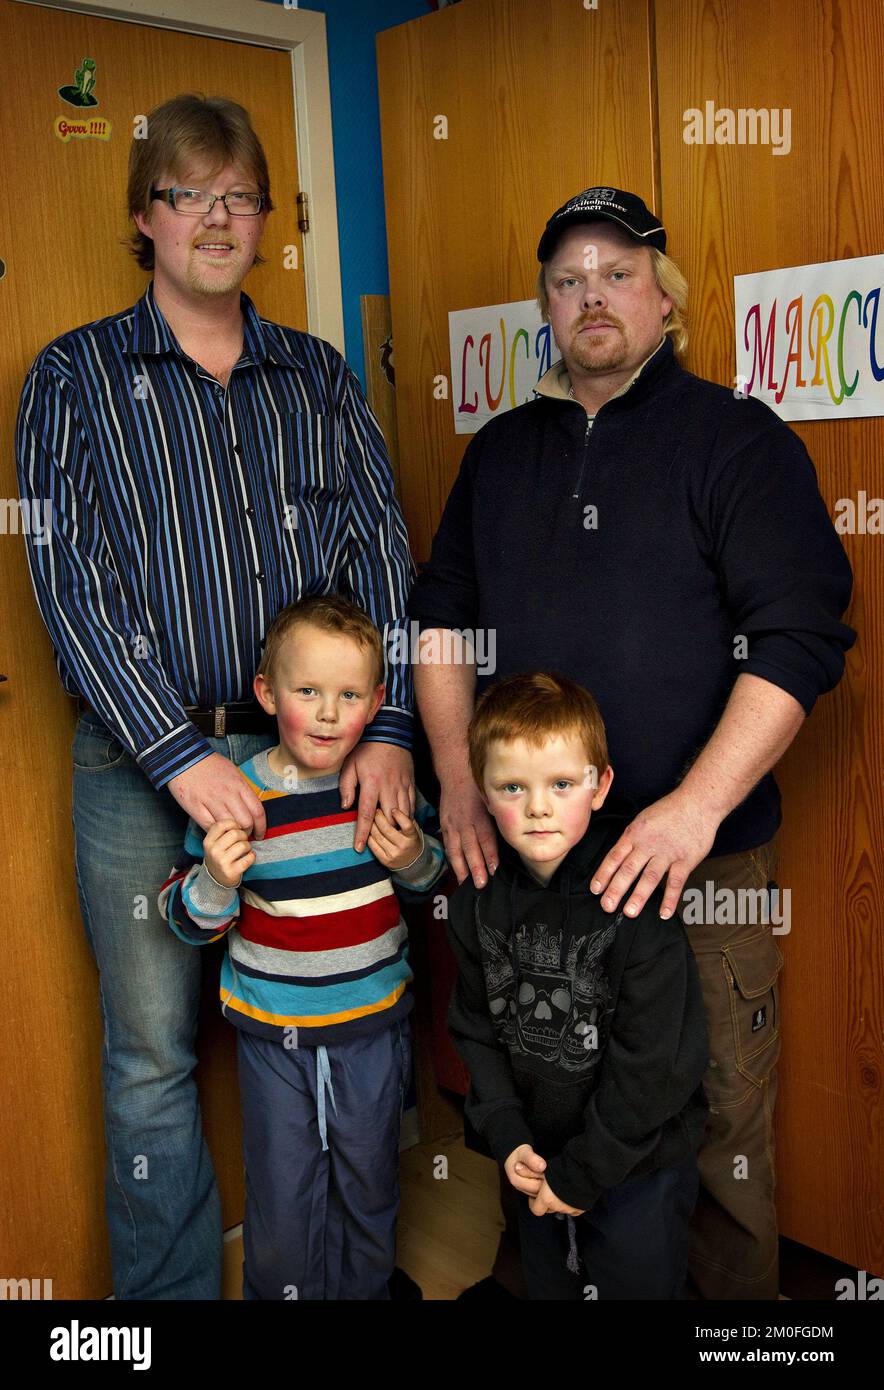 (L-R) Michael Nielsen and his son Marcus alongside Tommy Kallehauge and son Lucas. Twins Marcus and Lucas, born 48 minutes apart have two different fathers. Mum Charlotte Hilbrandt became pregnant by ex-husband Michael and new boyfriend Tommy when she slept with both men within 48 hours. Stock Photo